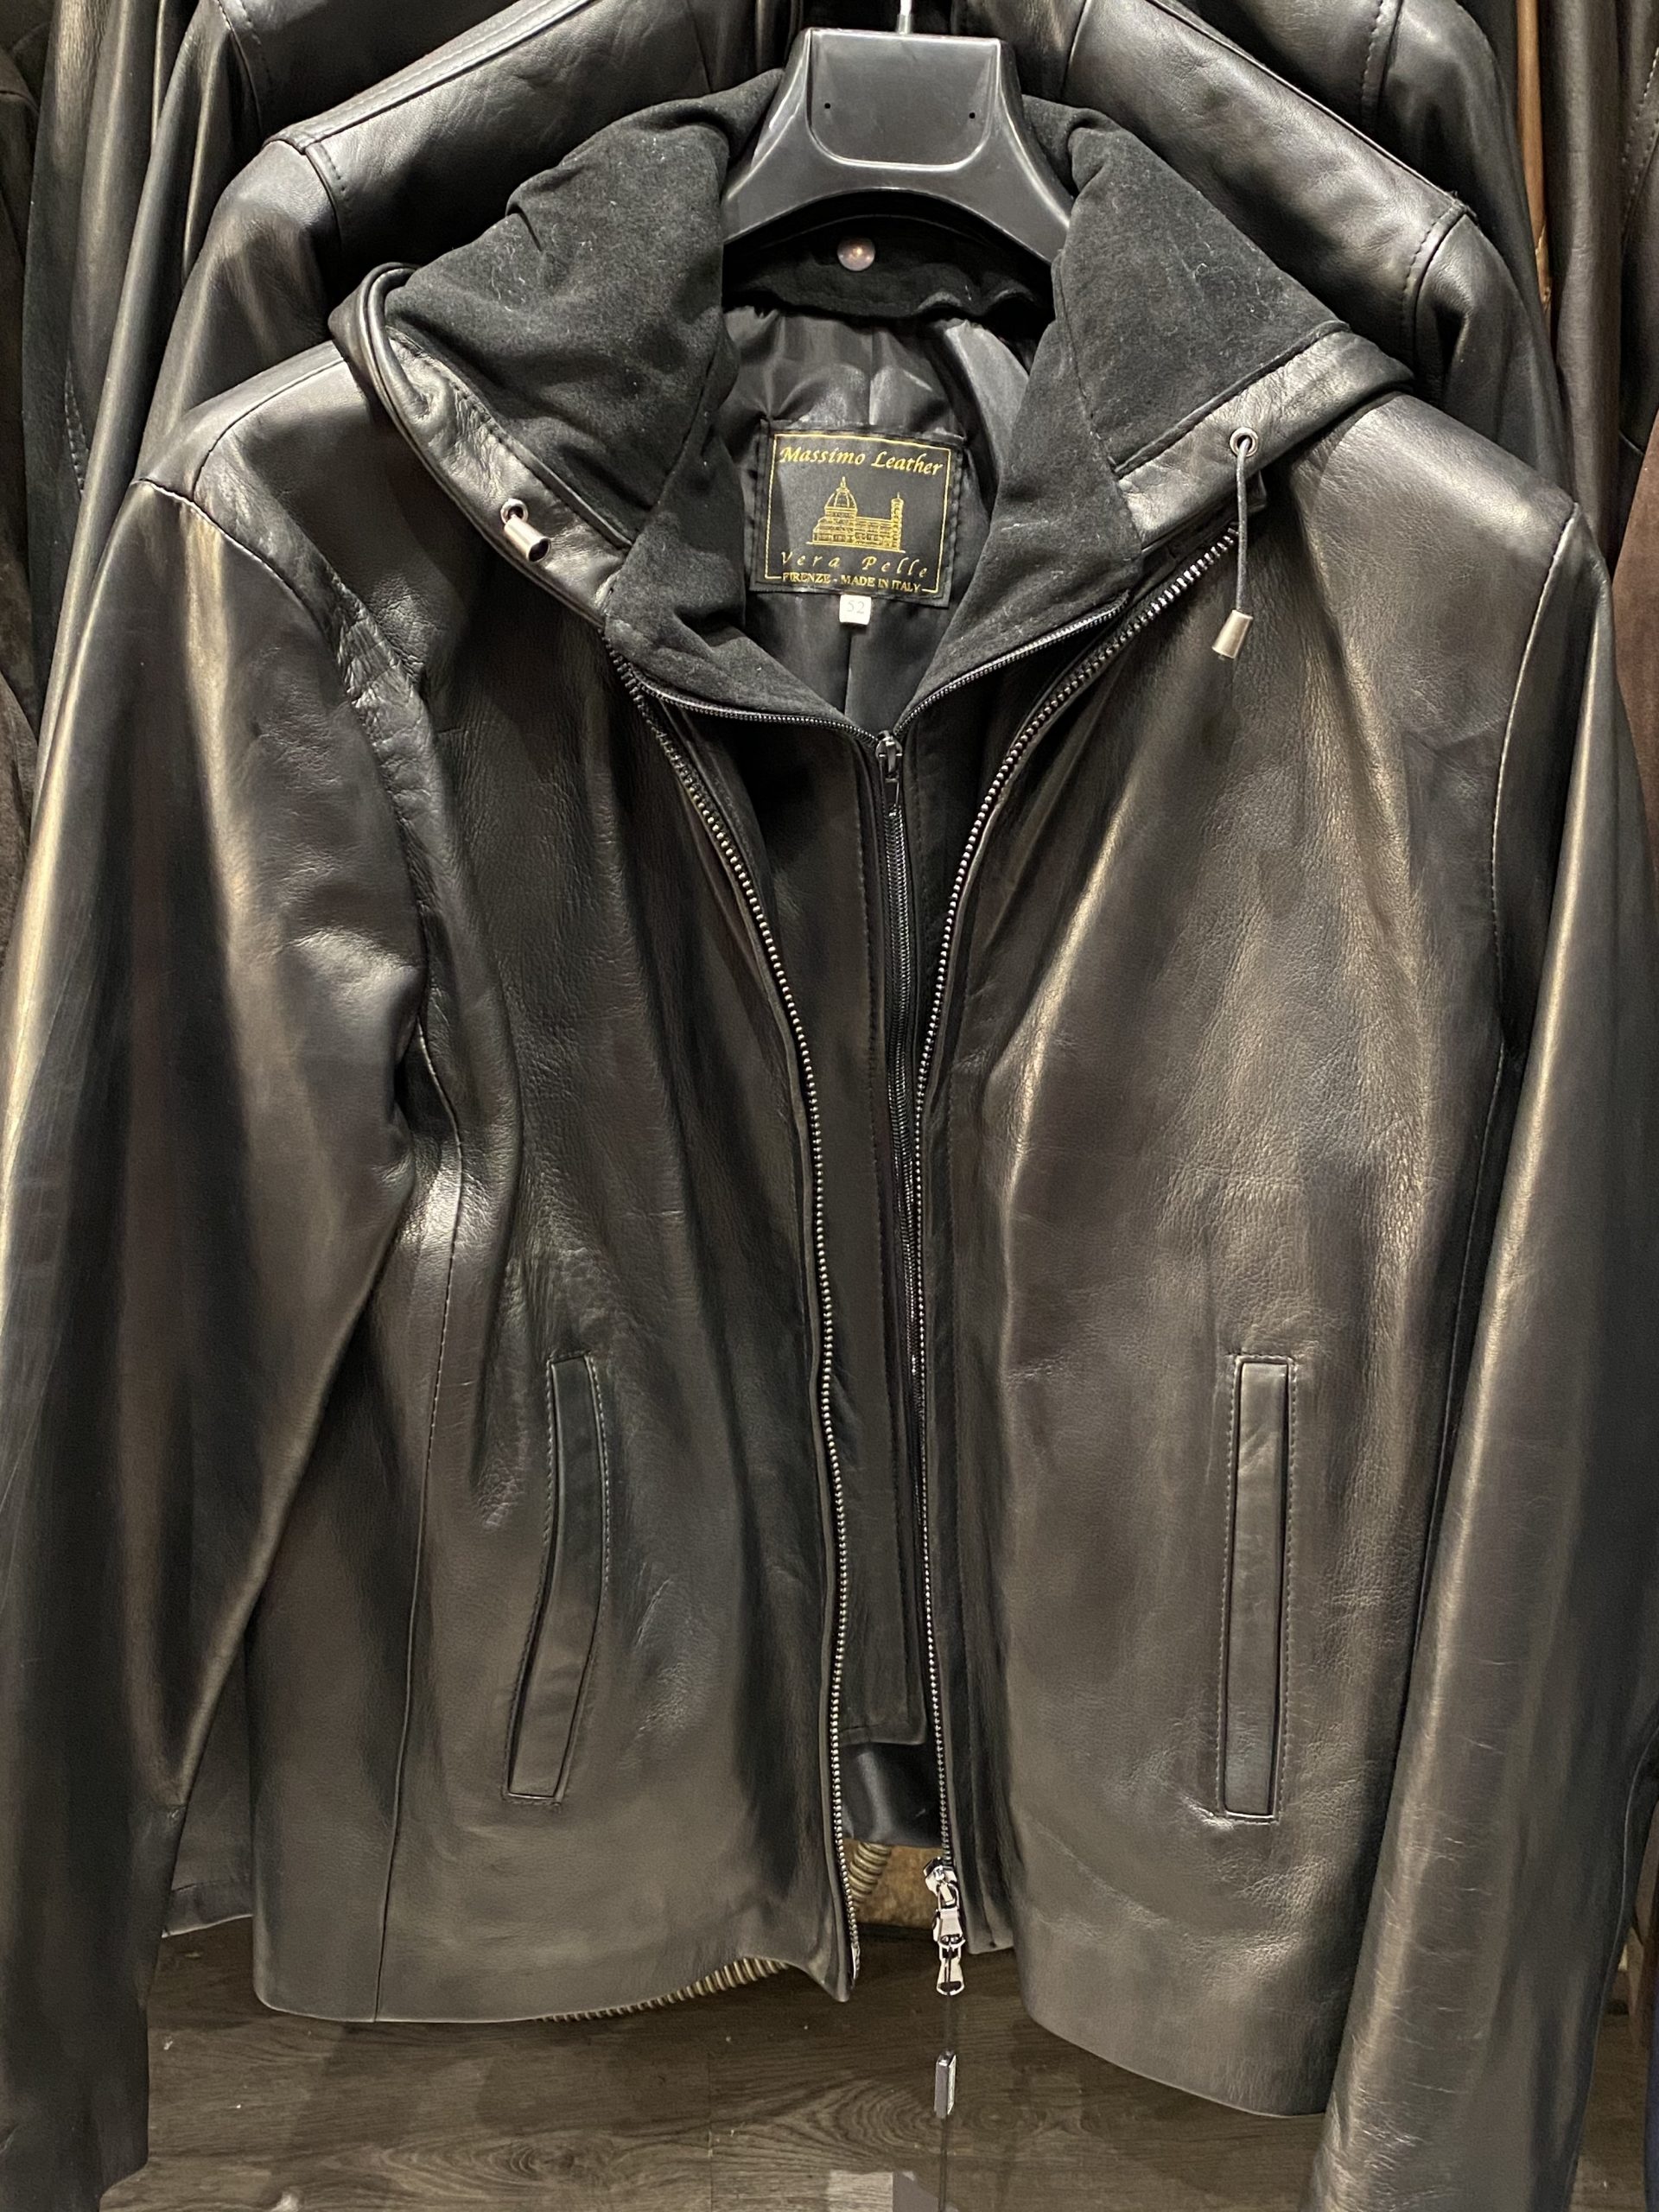 Leather Coats and Jackets in Florence in Italy - Layden Collette